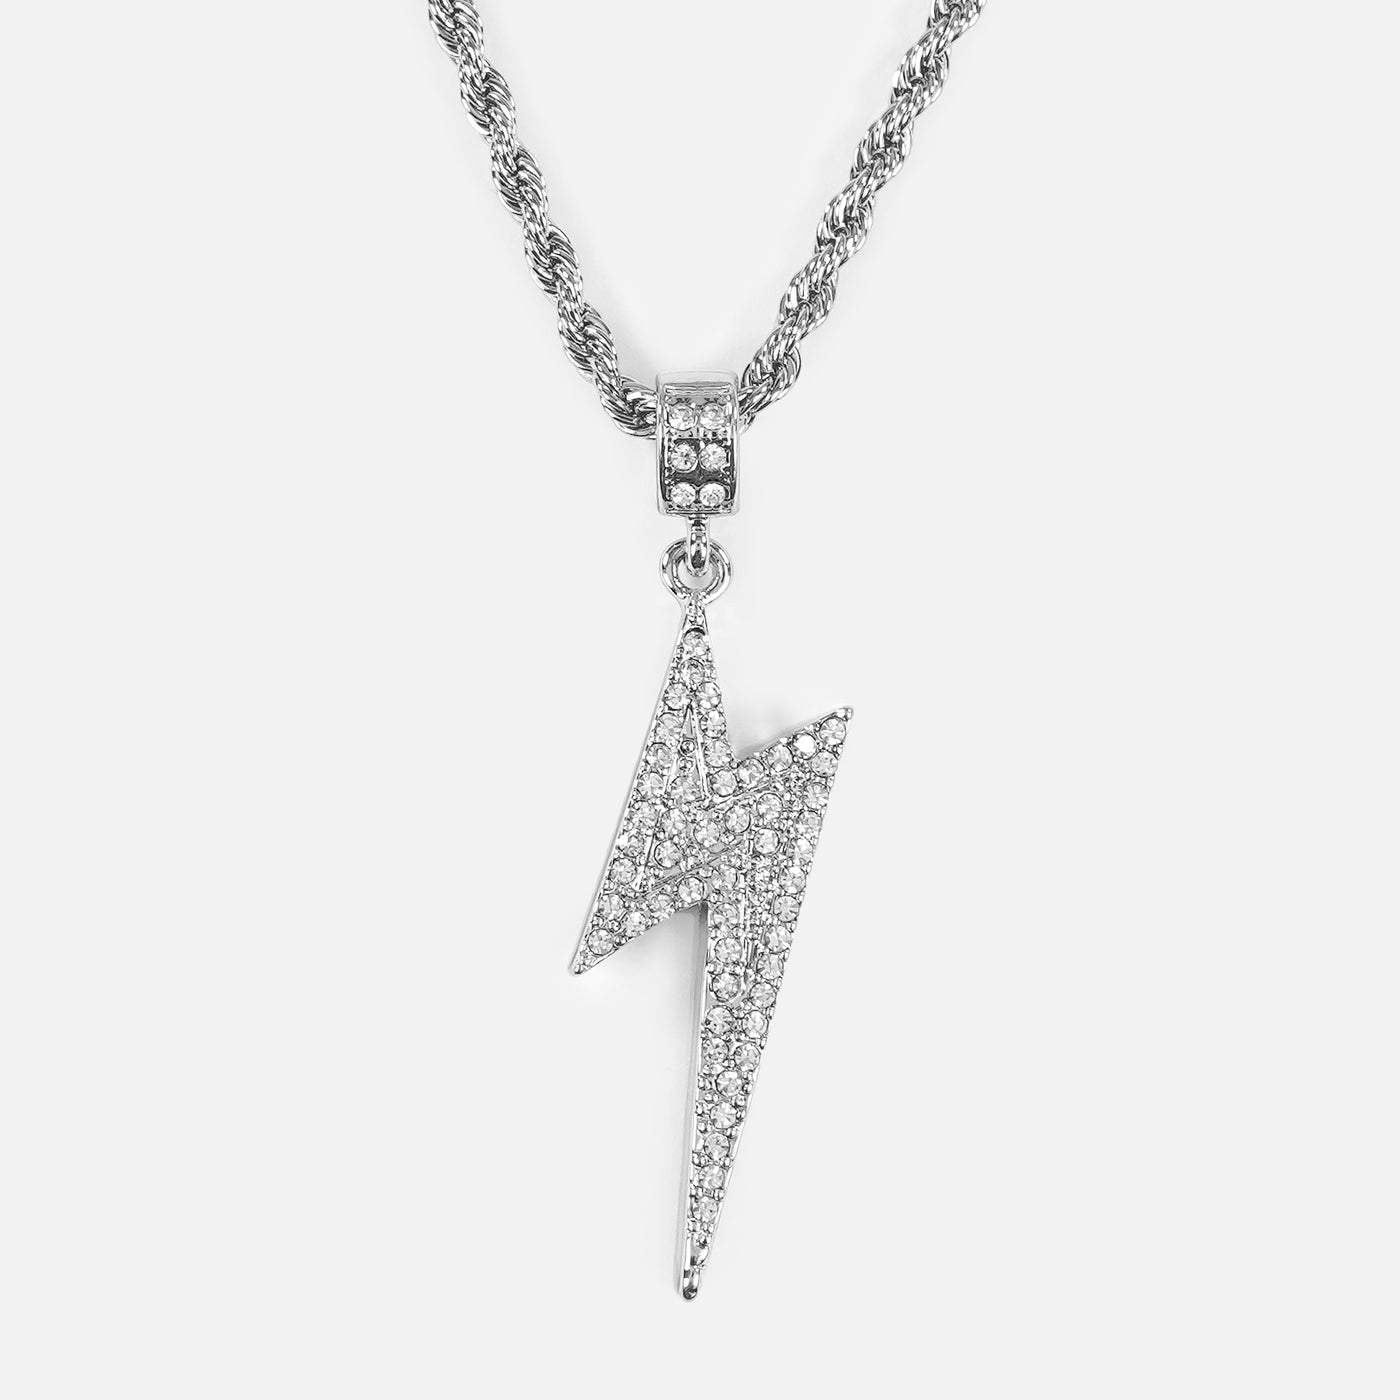 Lightning Bolt 2" Pendant with Chain Necklace - Stainless Steel